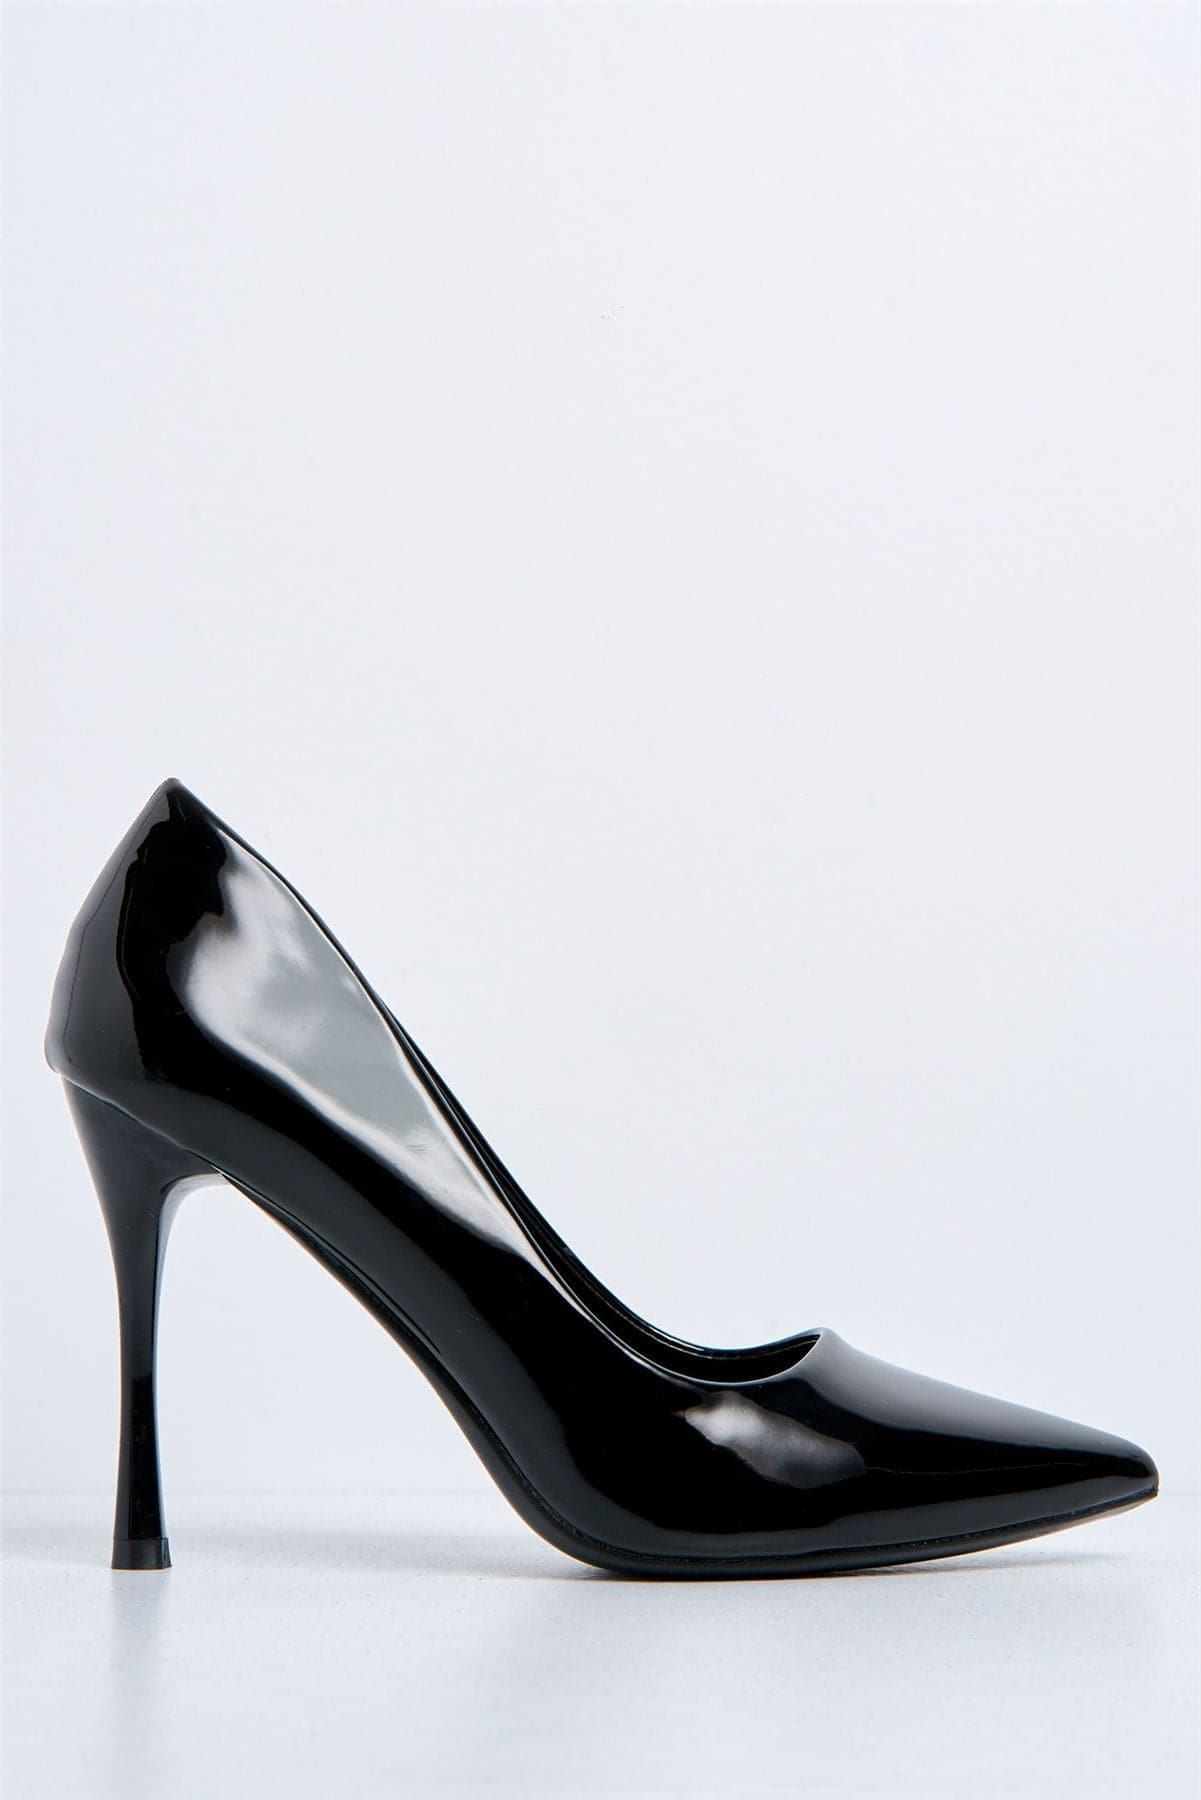 Miss Diva Gina Spool Heel Court Shoes in Black Patent